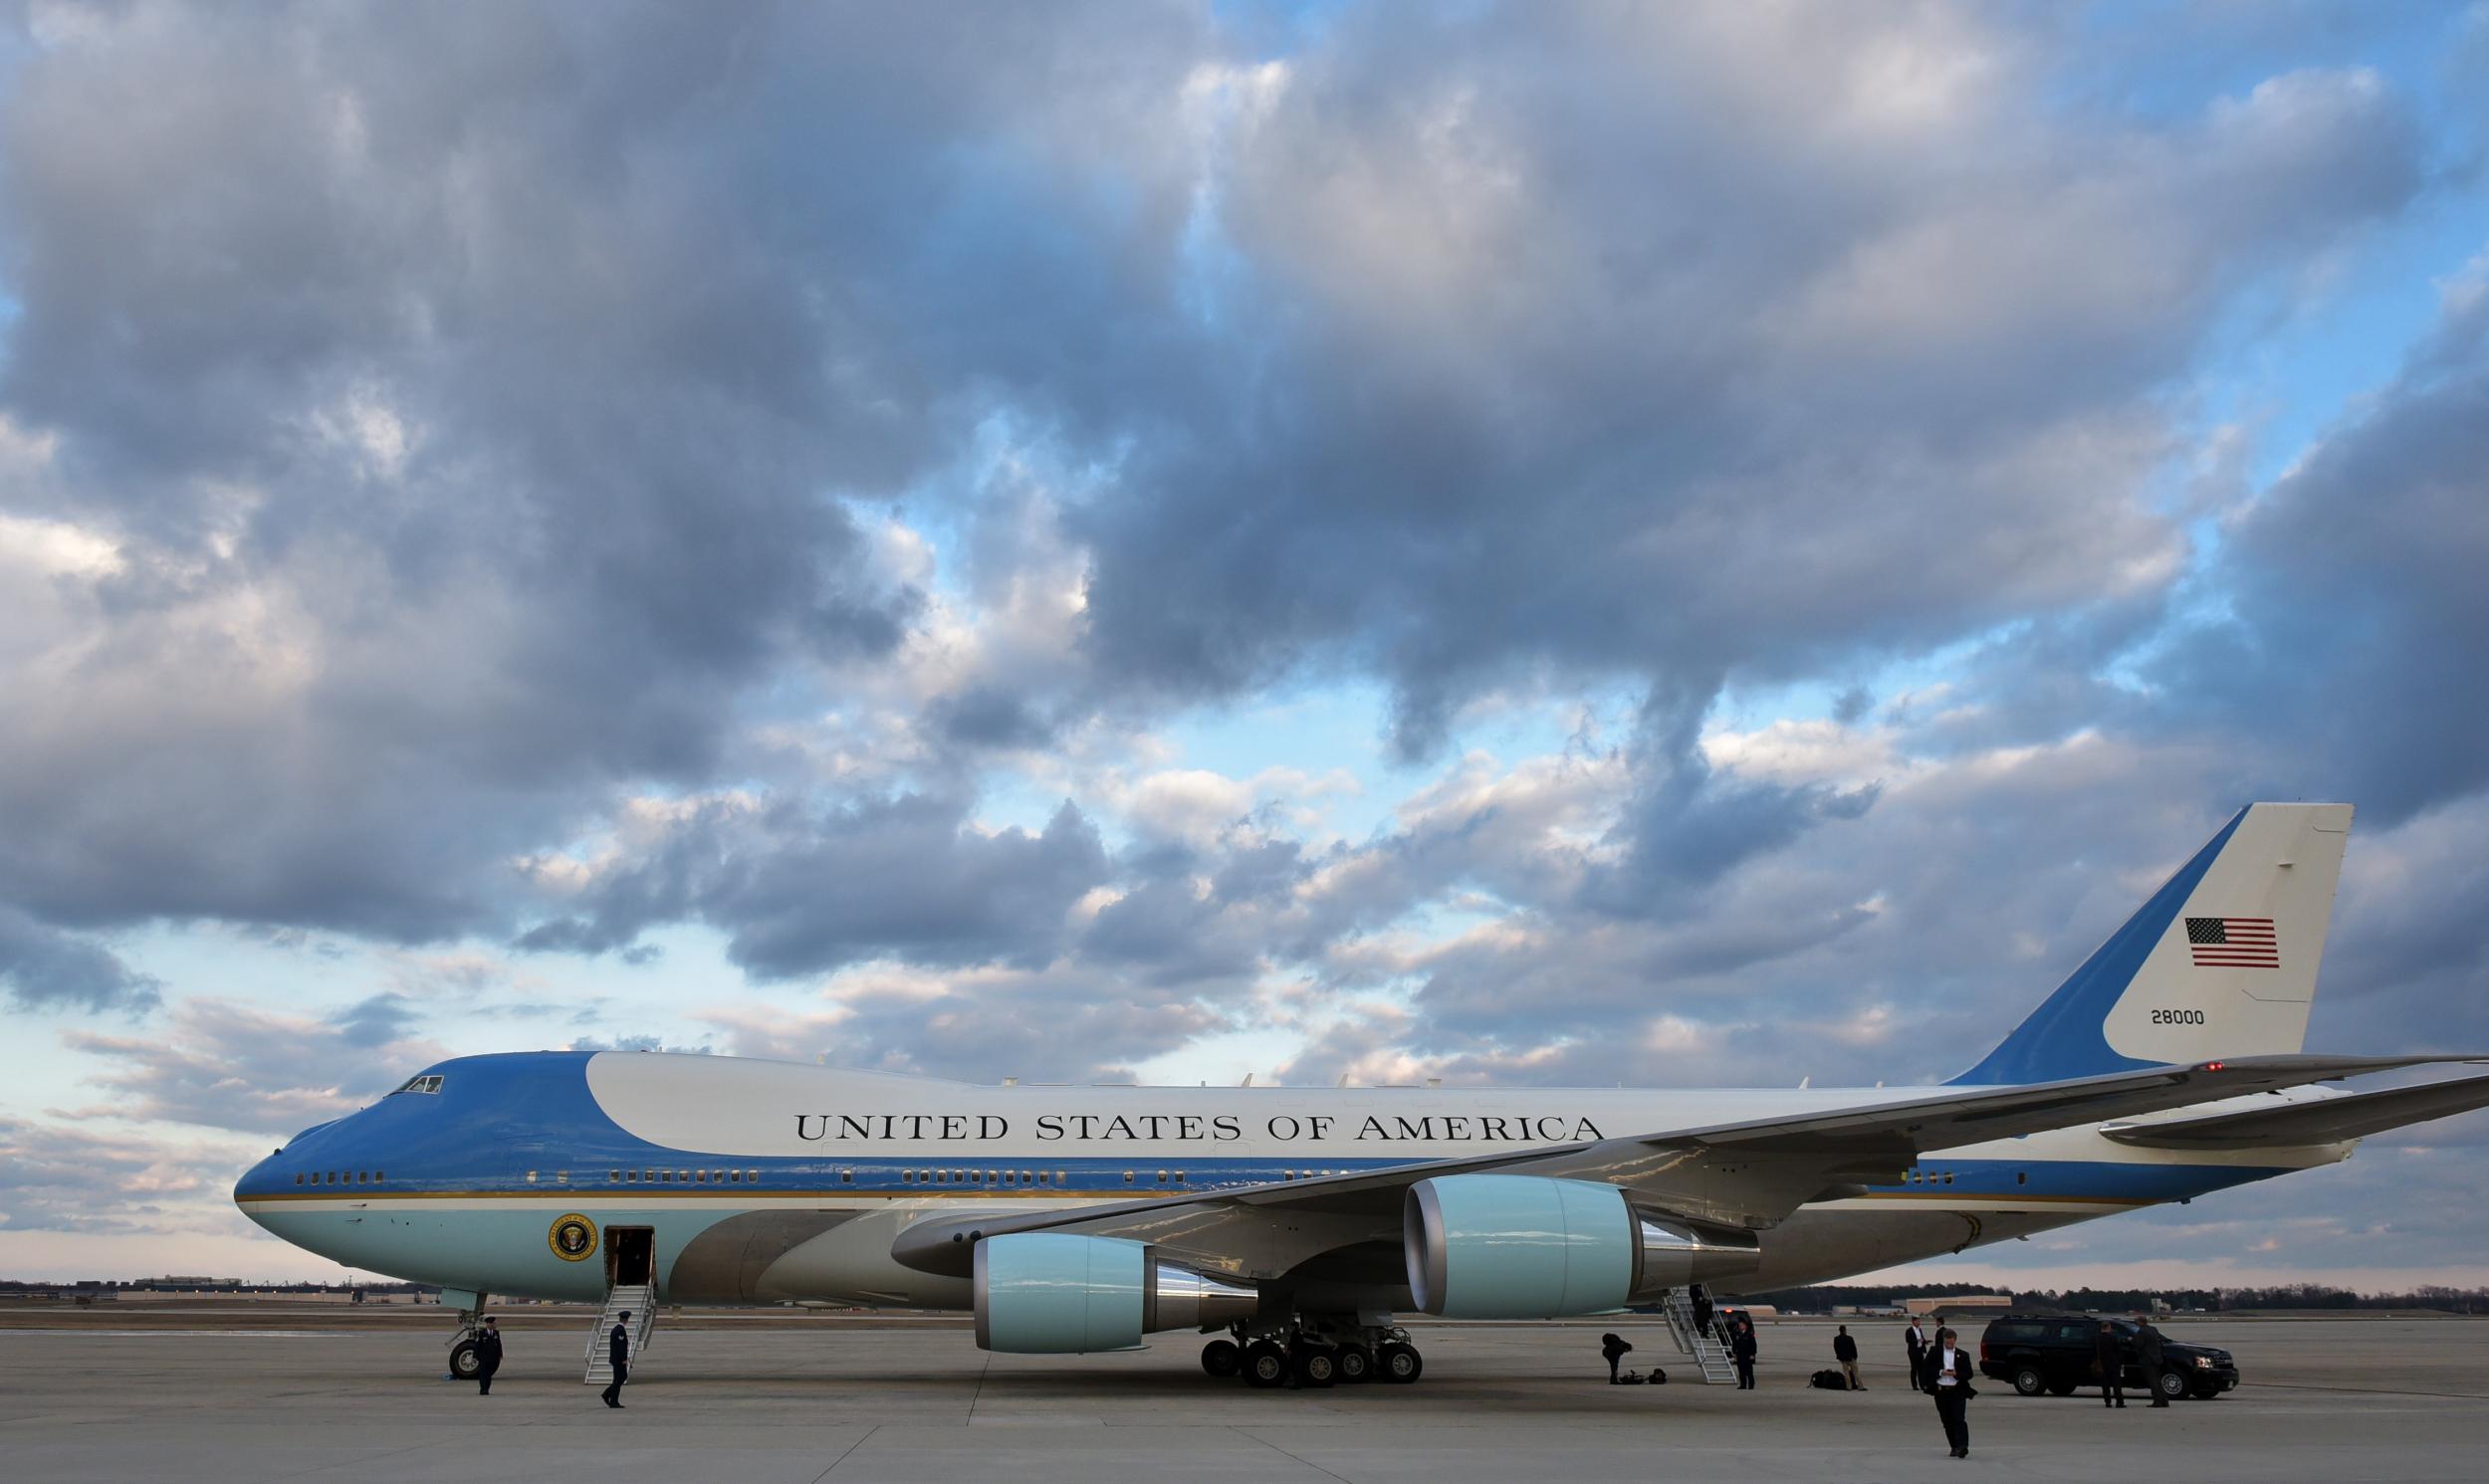 Three Boeing mechanics used contaminated tools to service Air Force One, causing $4 million in damages